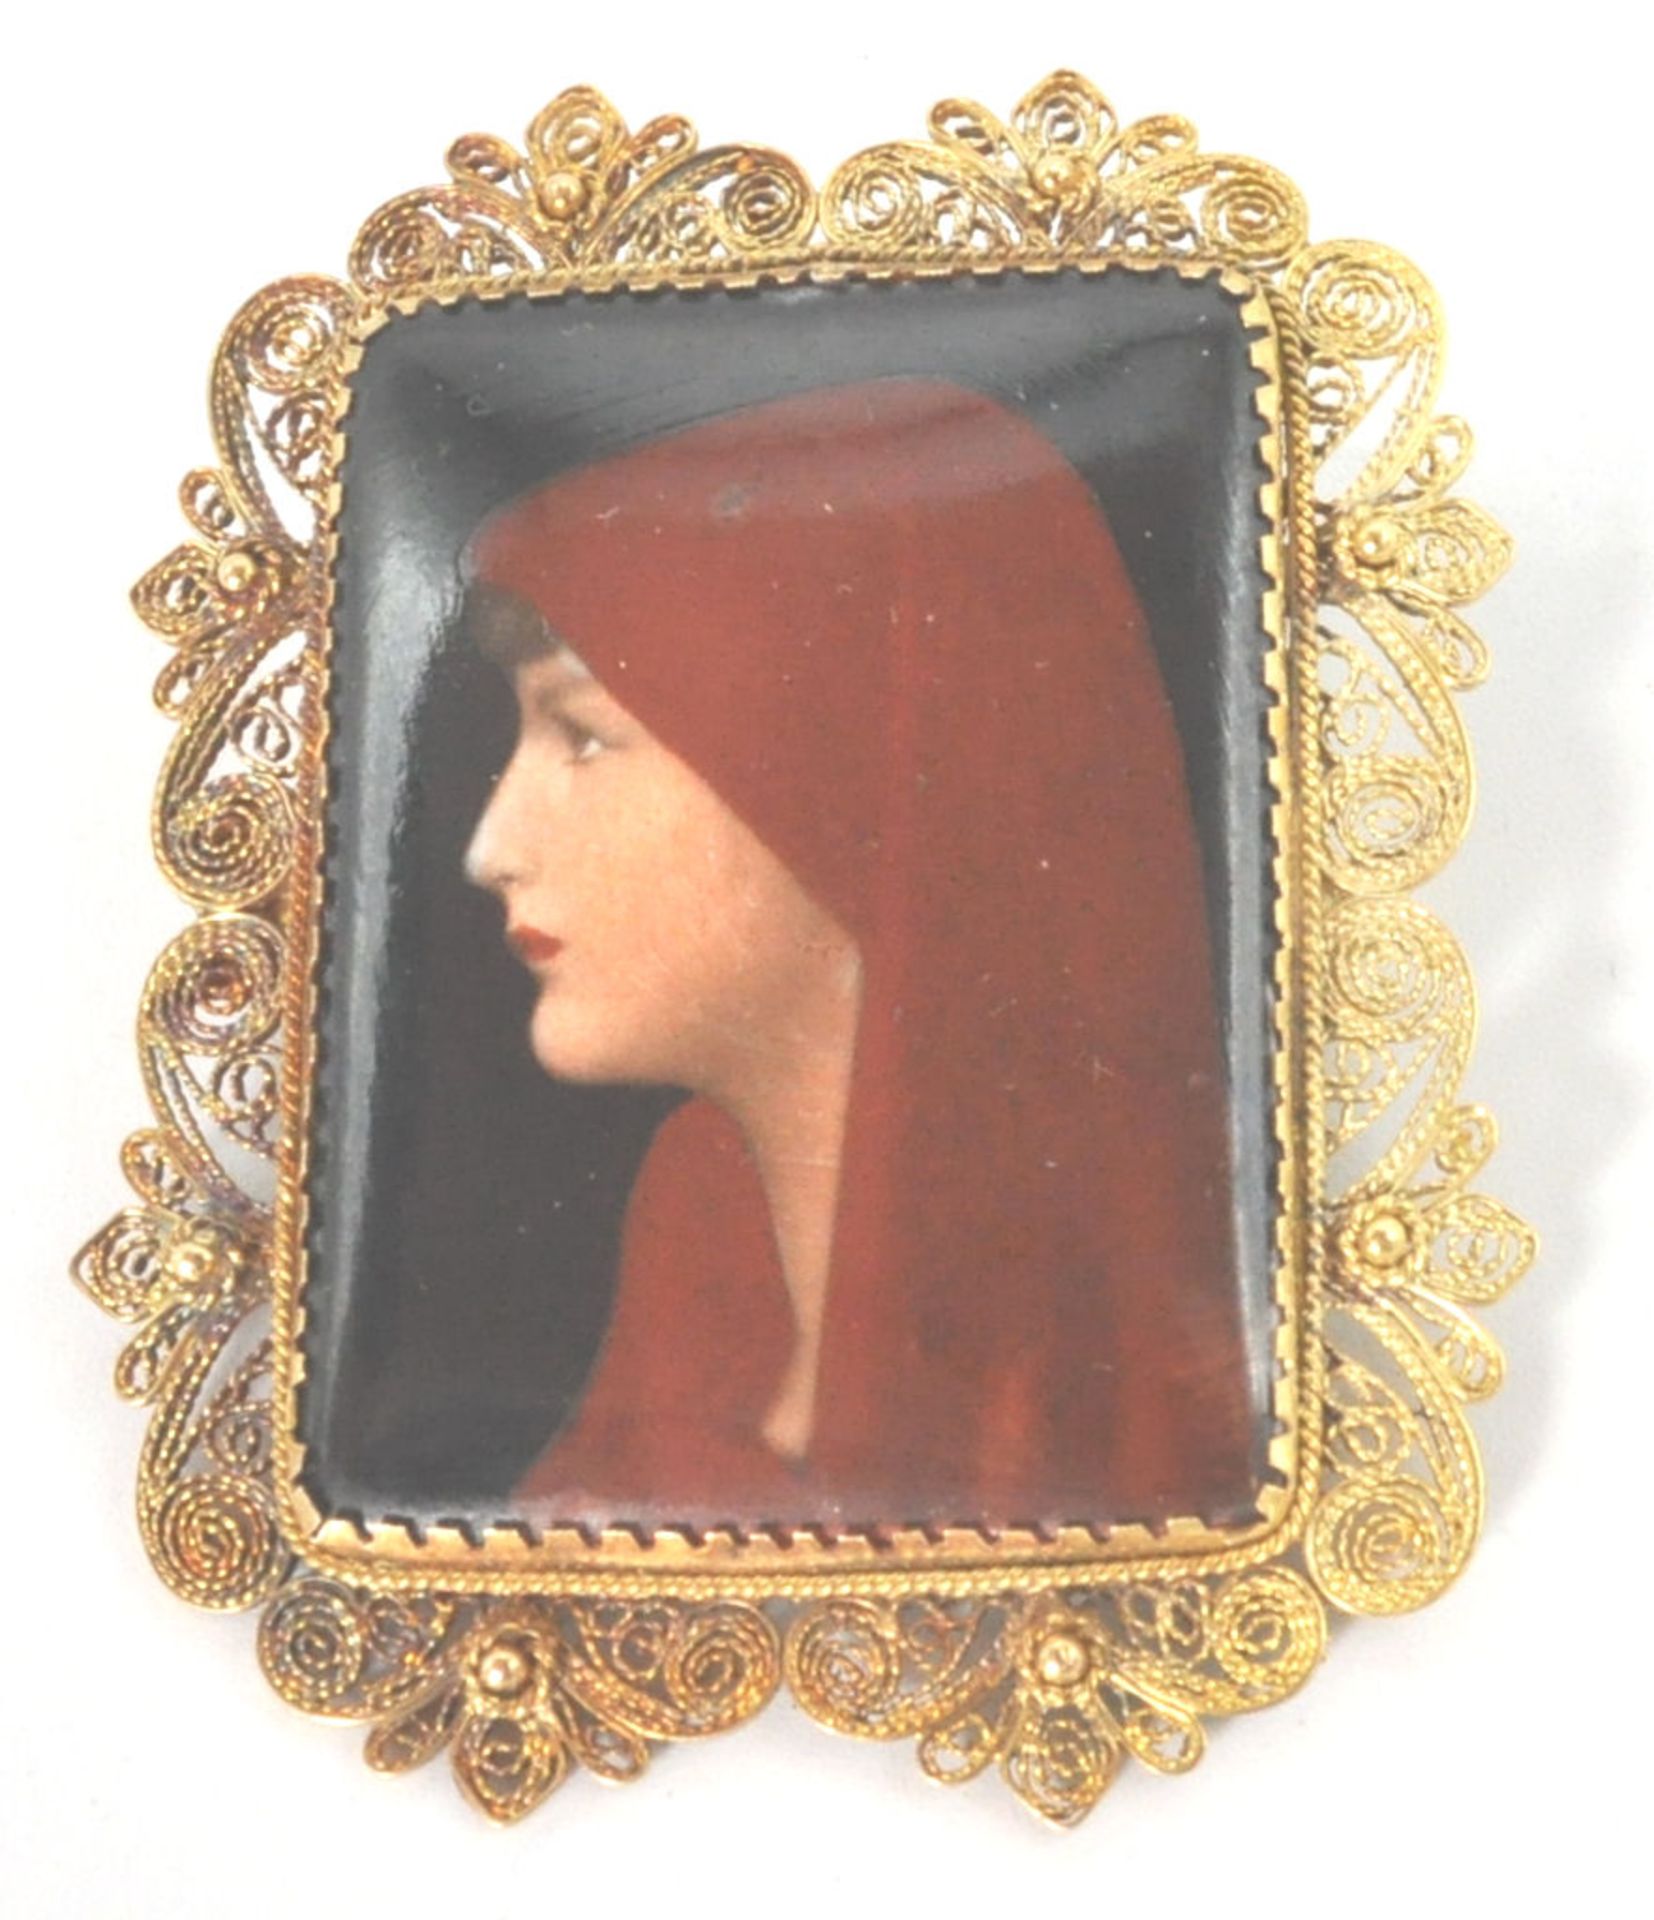 A 19th Victorian hand painted miniature of a hooded lady in the form of a brooch edged with filigree